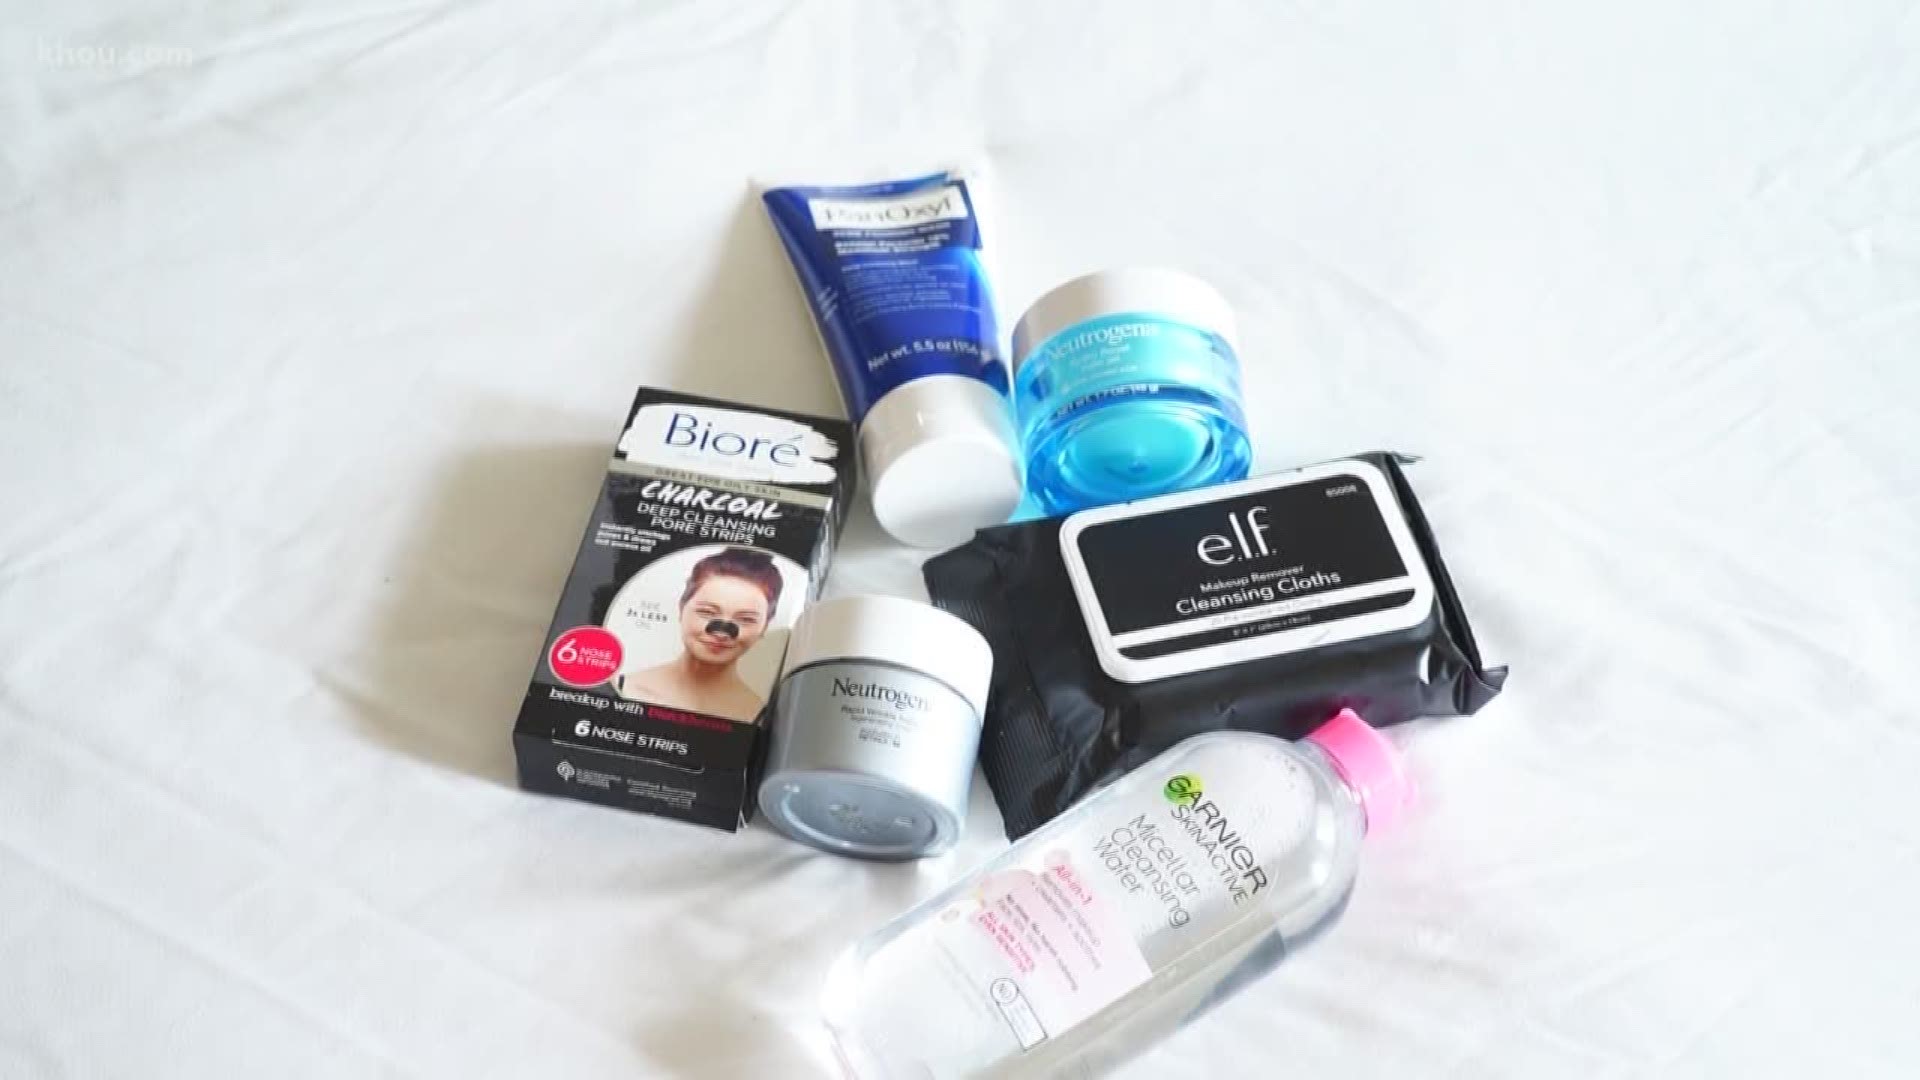 A League City blogger came up with a list called "Drugstore Skincare Gems" with some products celebrities love.